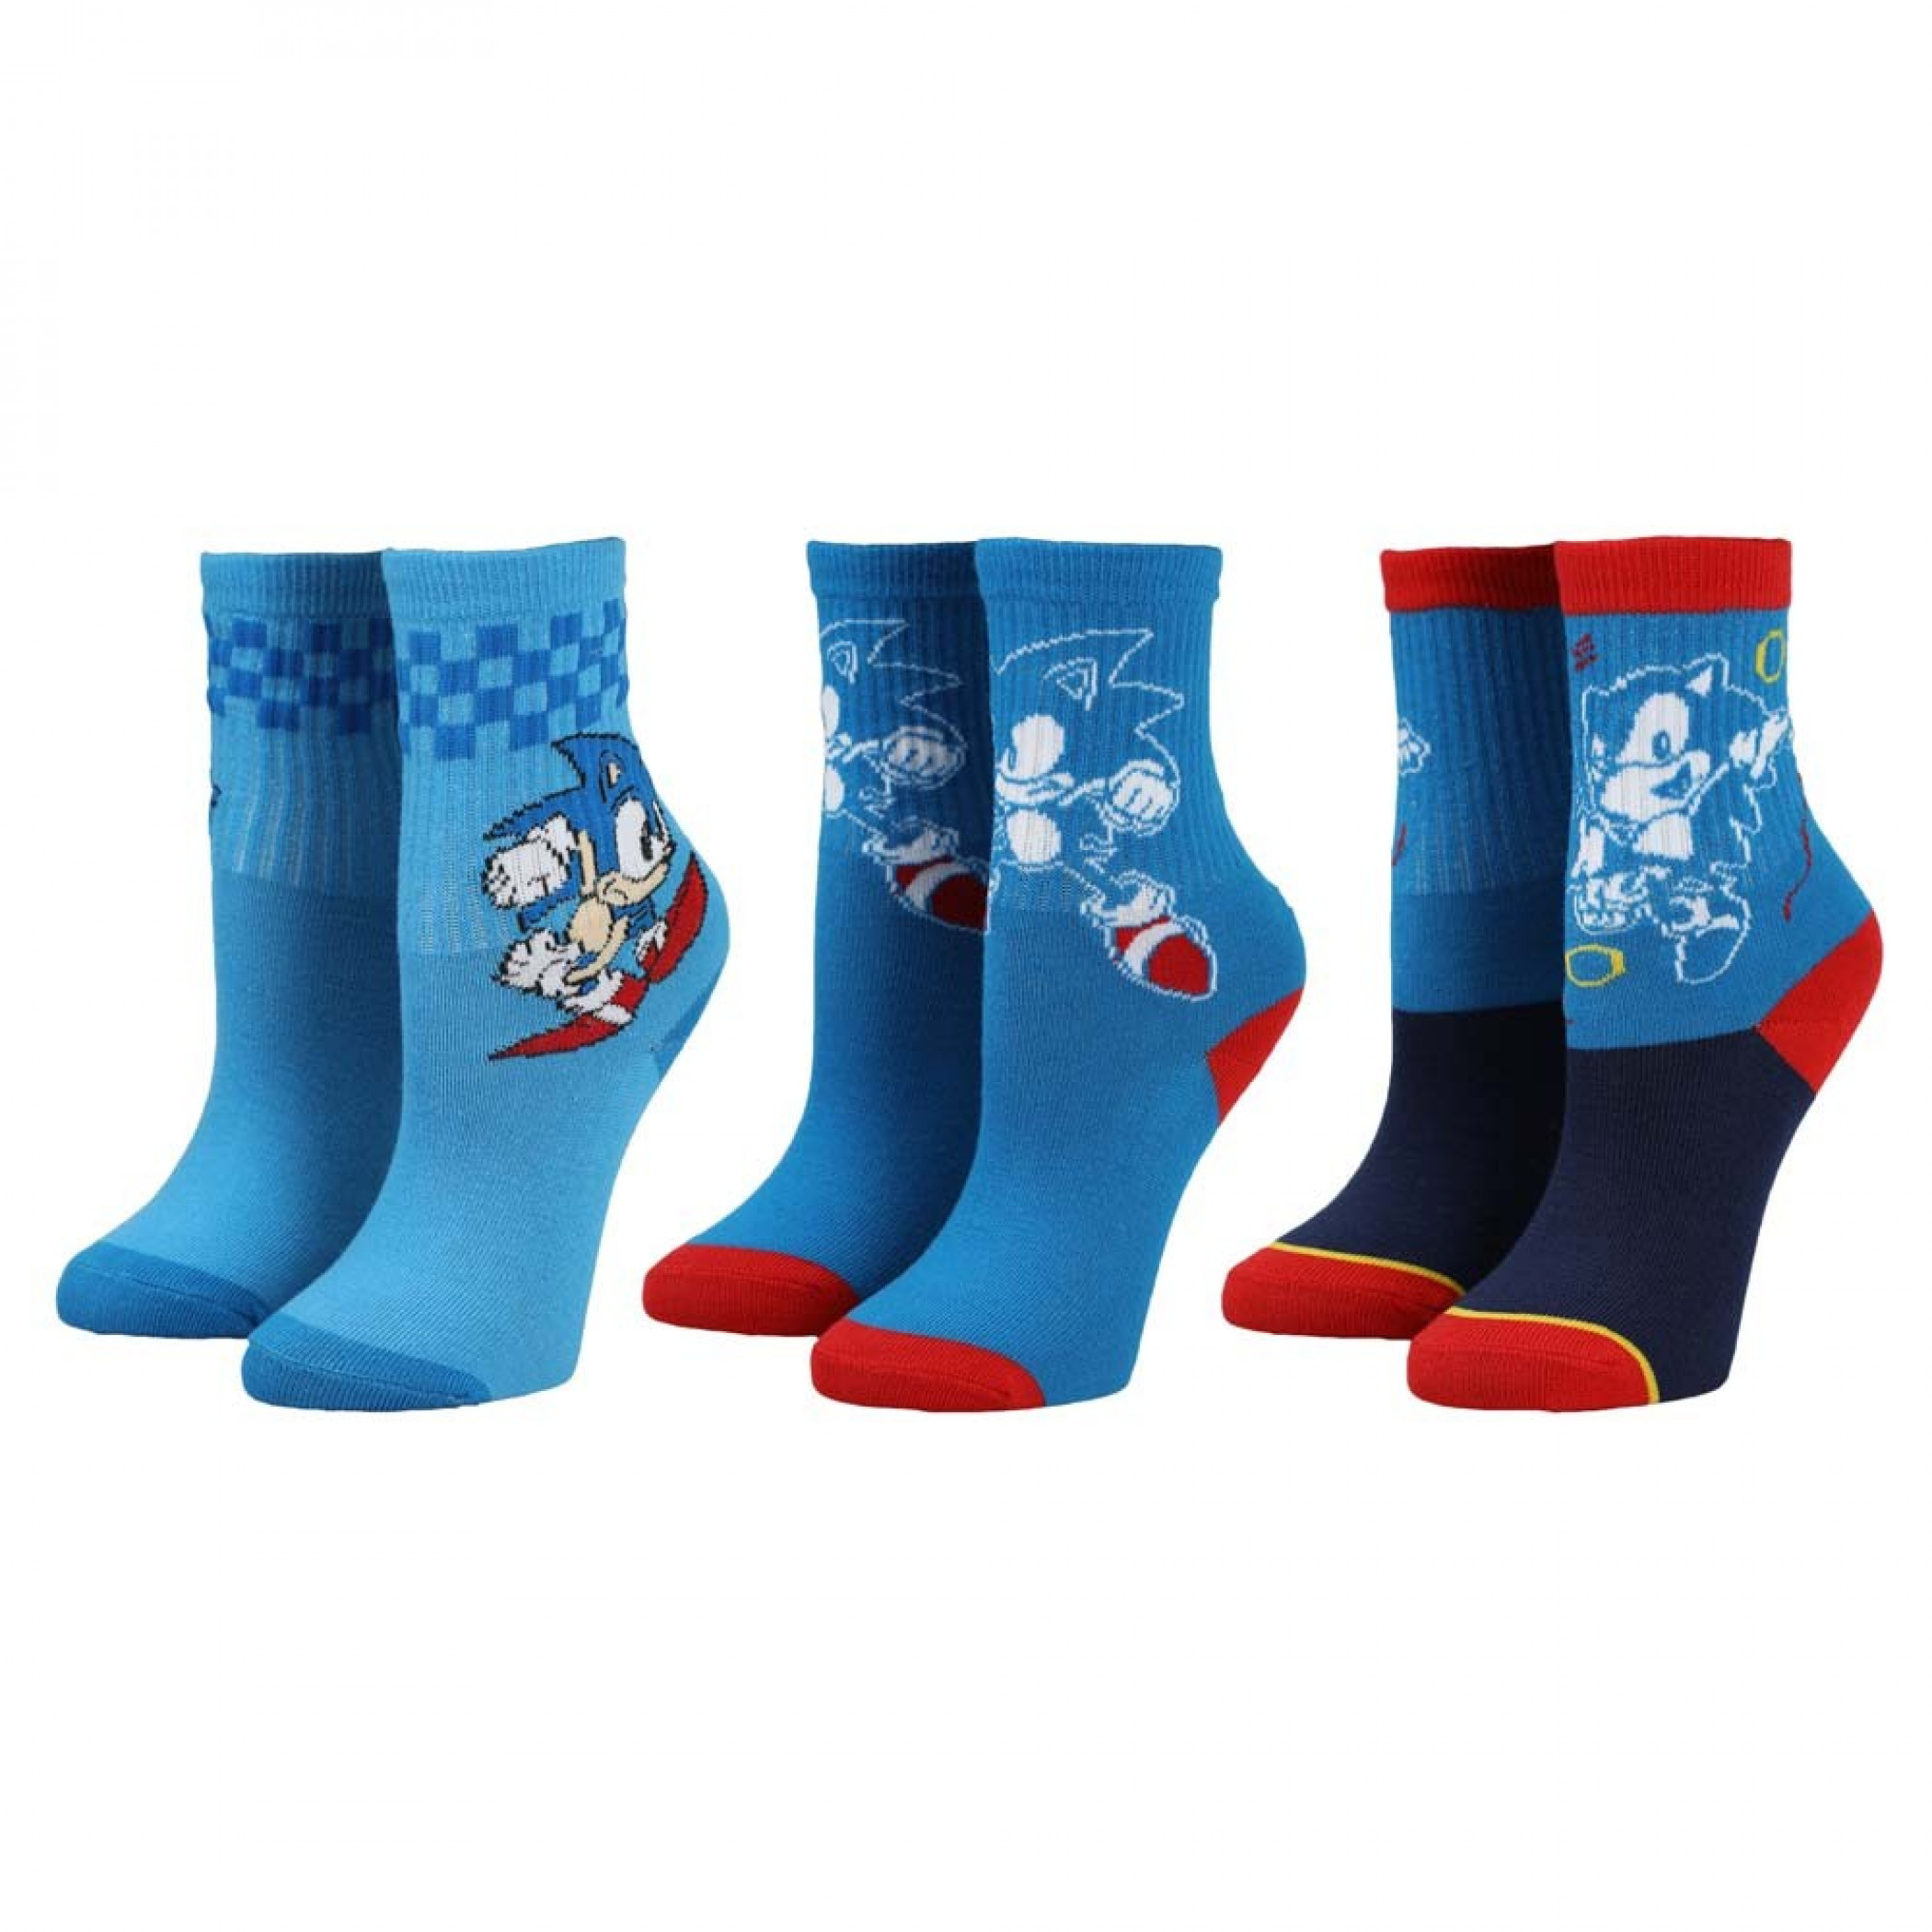 Sonic The Hedgehog 3-Pair Pack of Youth Crew Socks